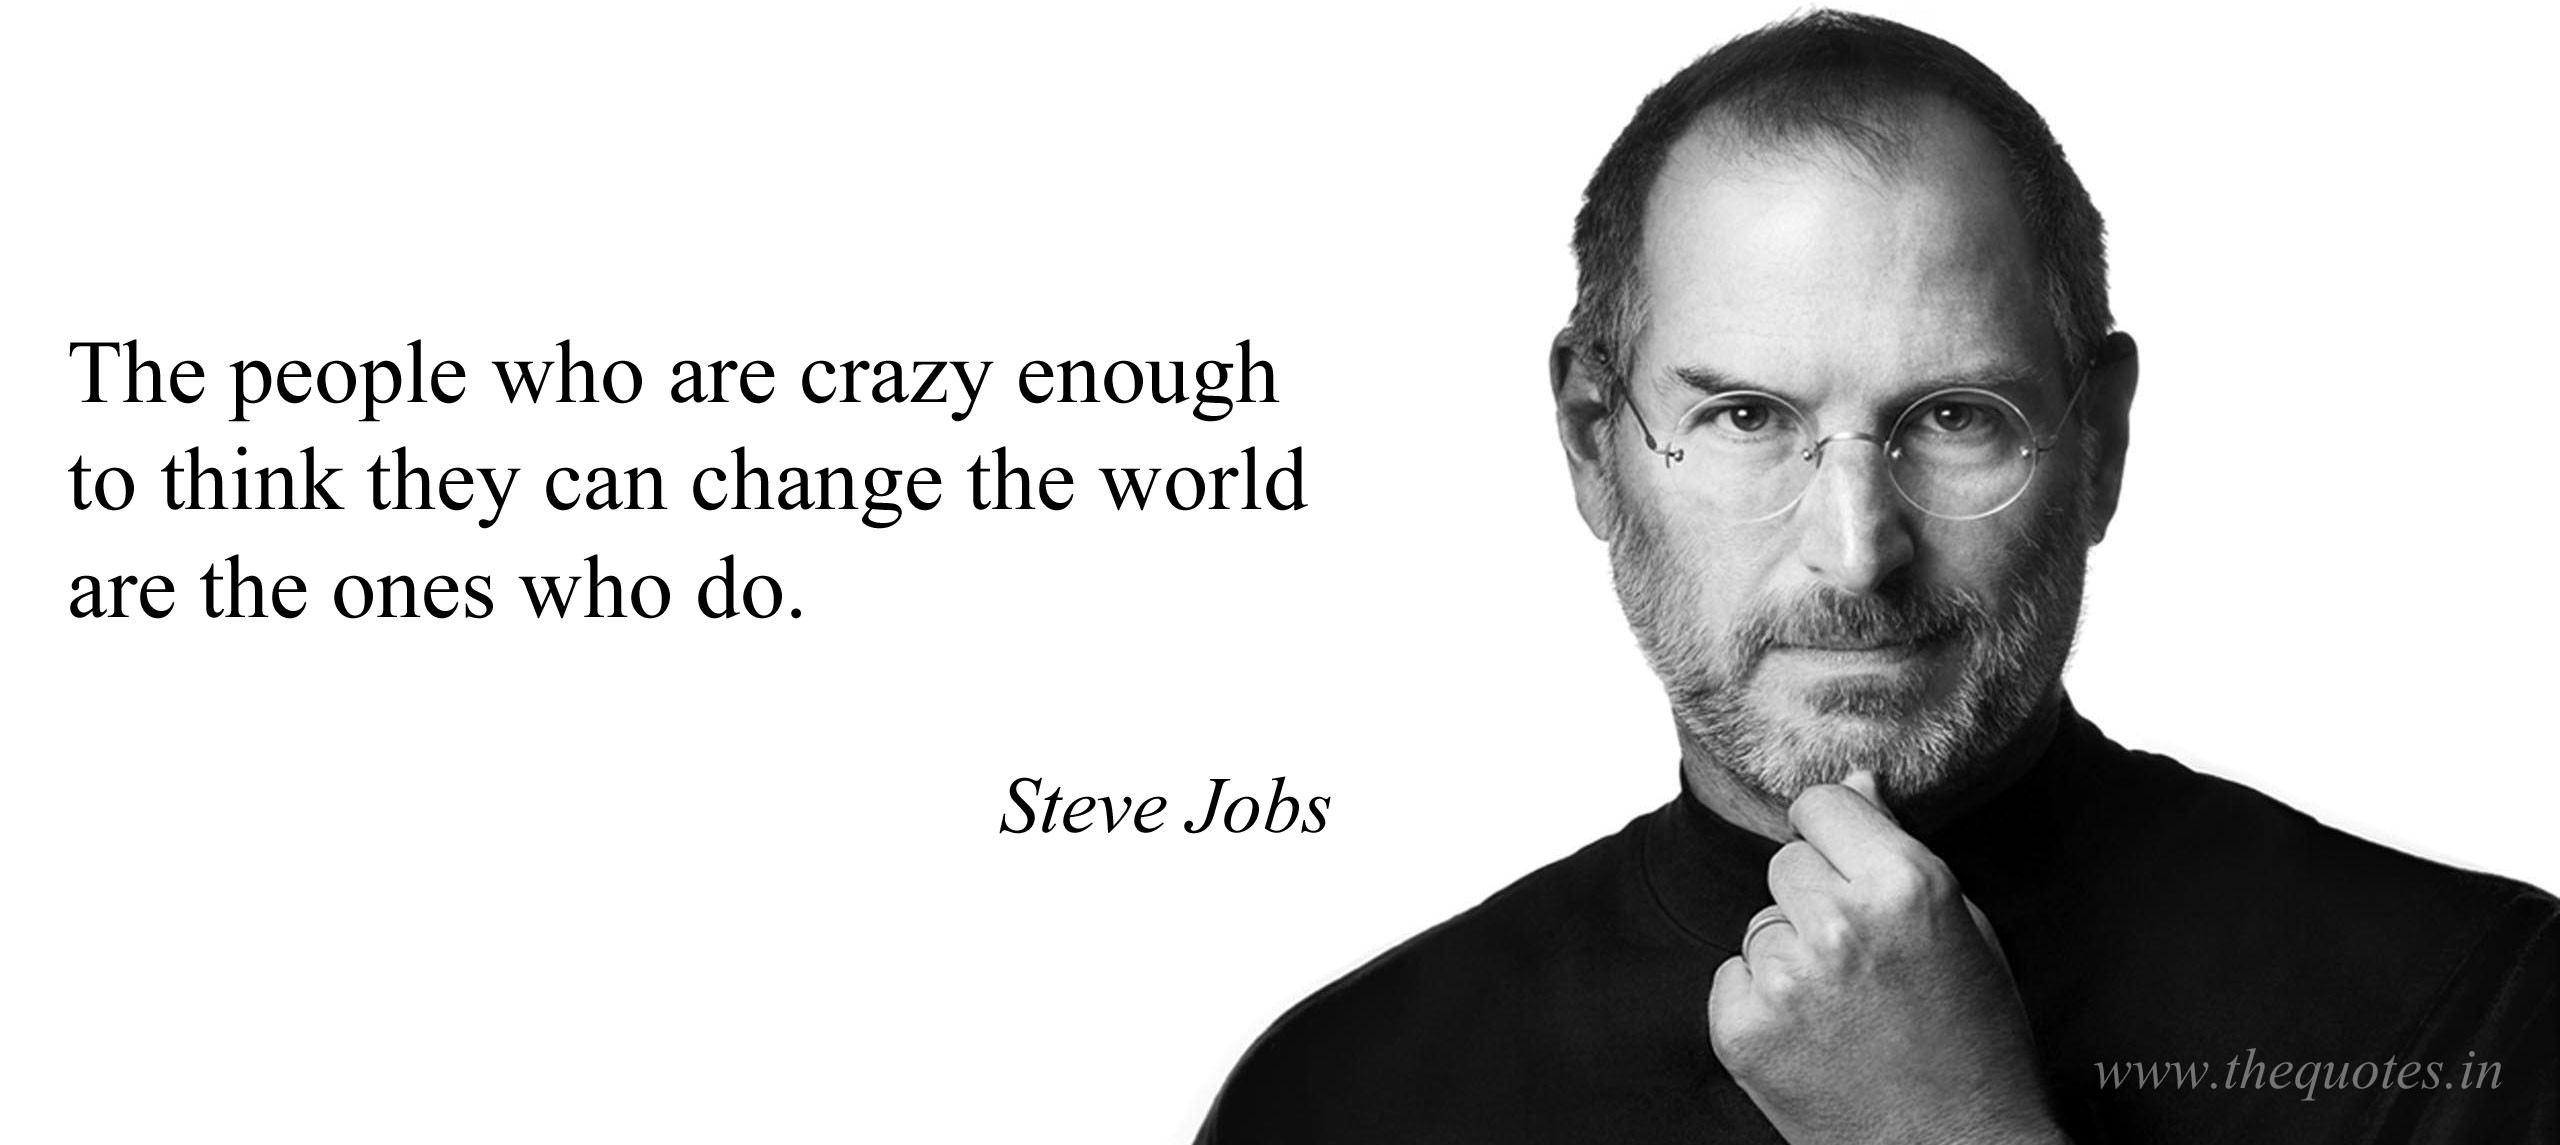 Steve Jobs Motivational Quotes
 10 Steve Jobs Marketing Lessons and his Famous Marketing